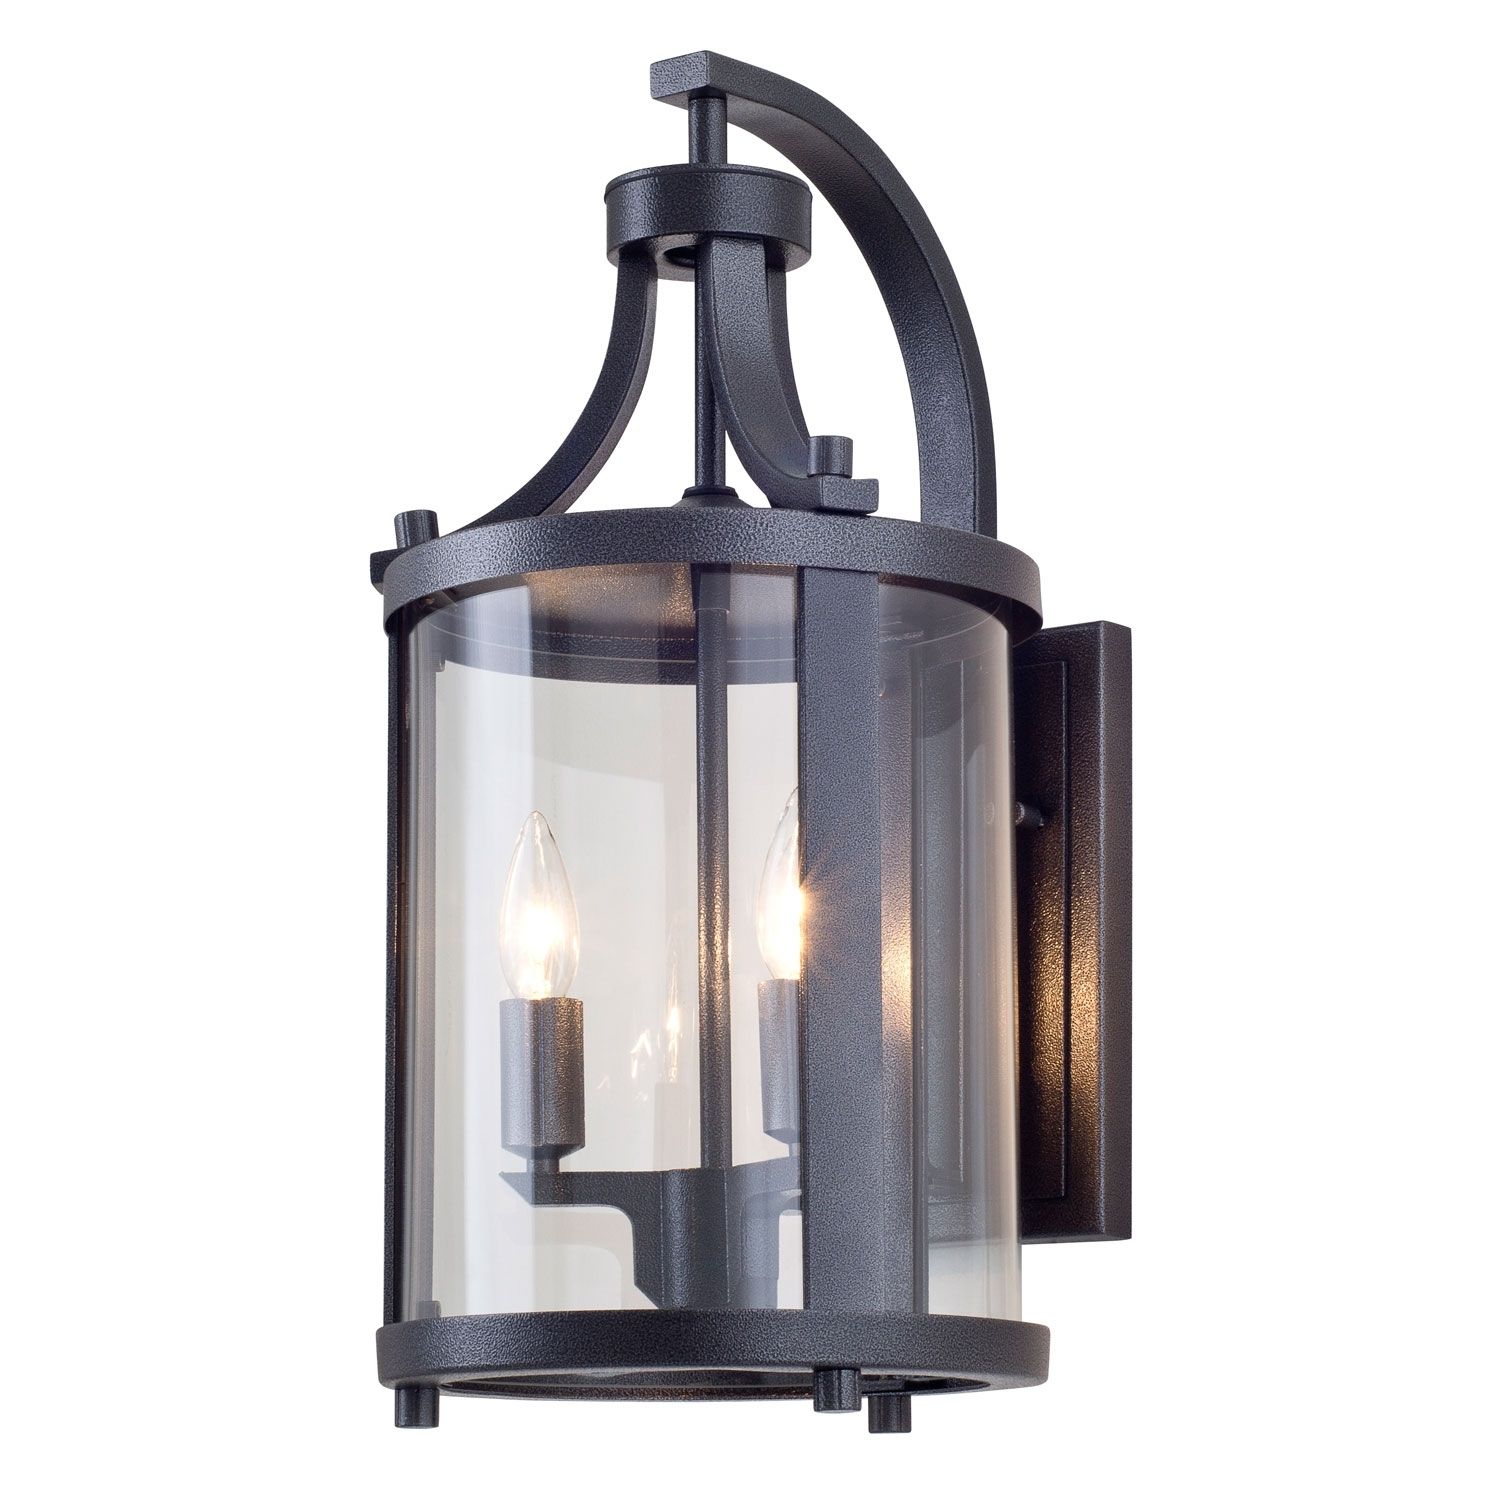 Outdoor Wall Lighting On Sale | Bellacor Within Outdoor Wall Lighting Sets (View 12 of 15)